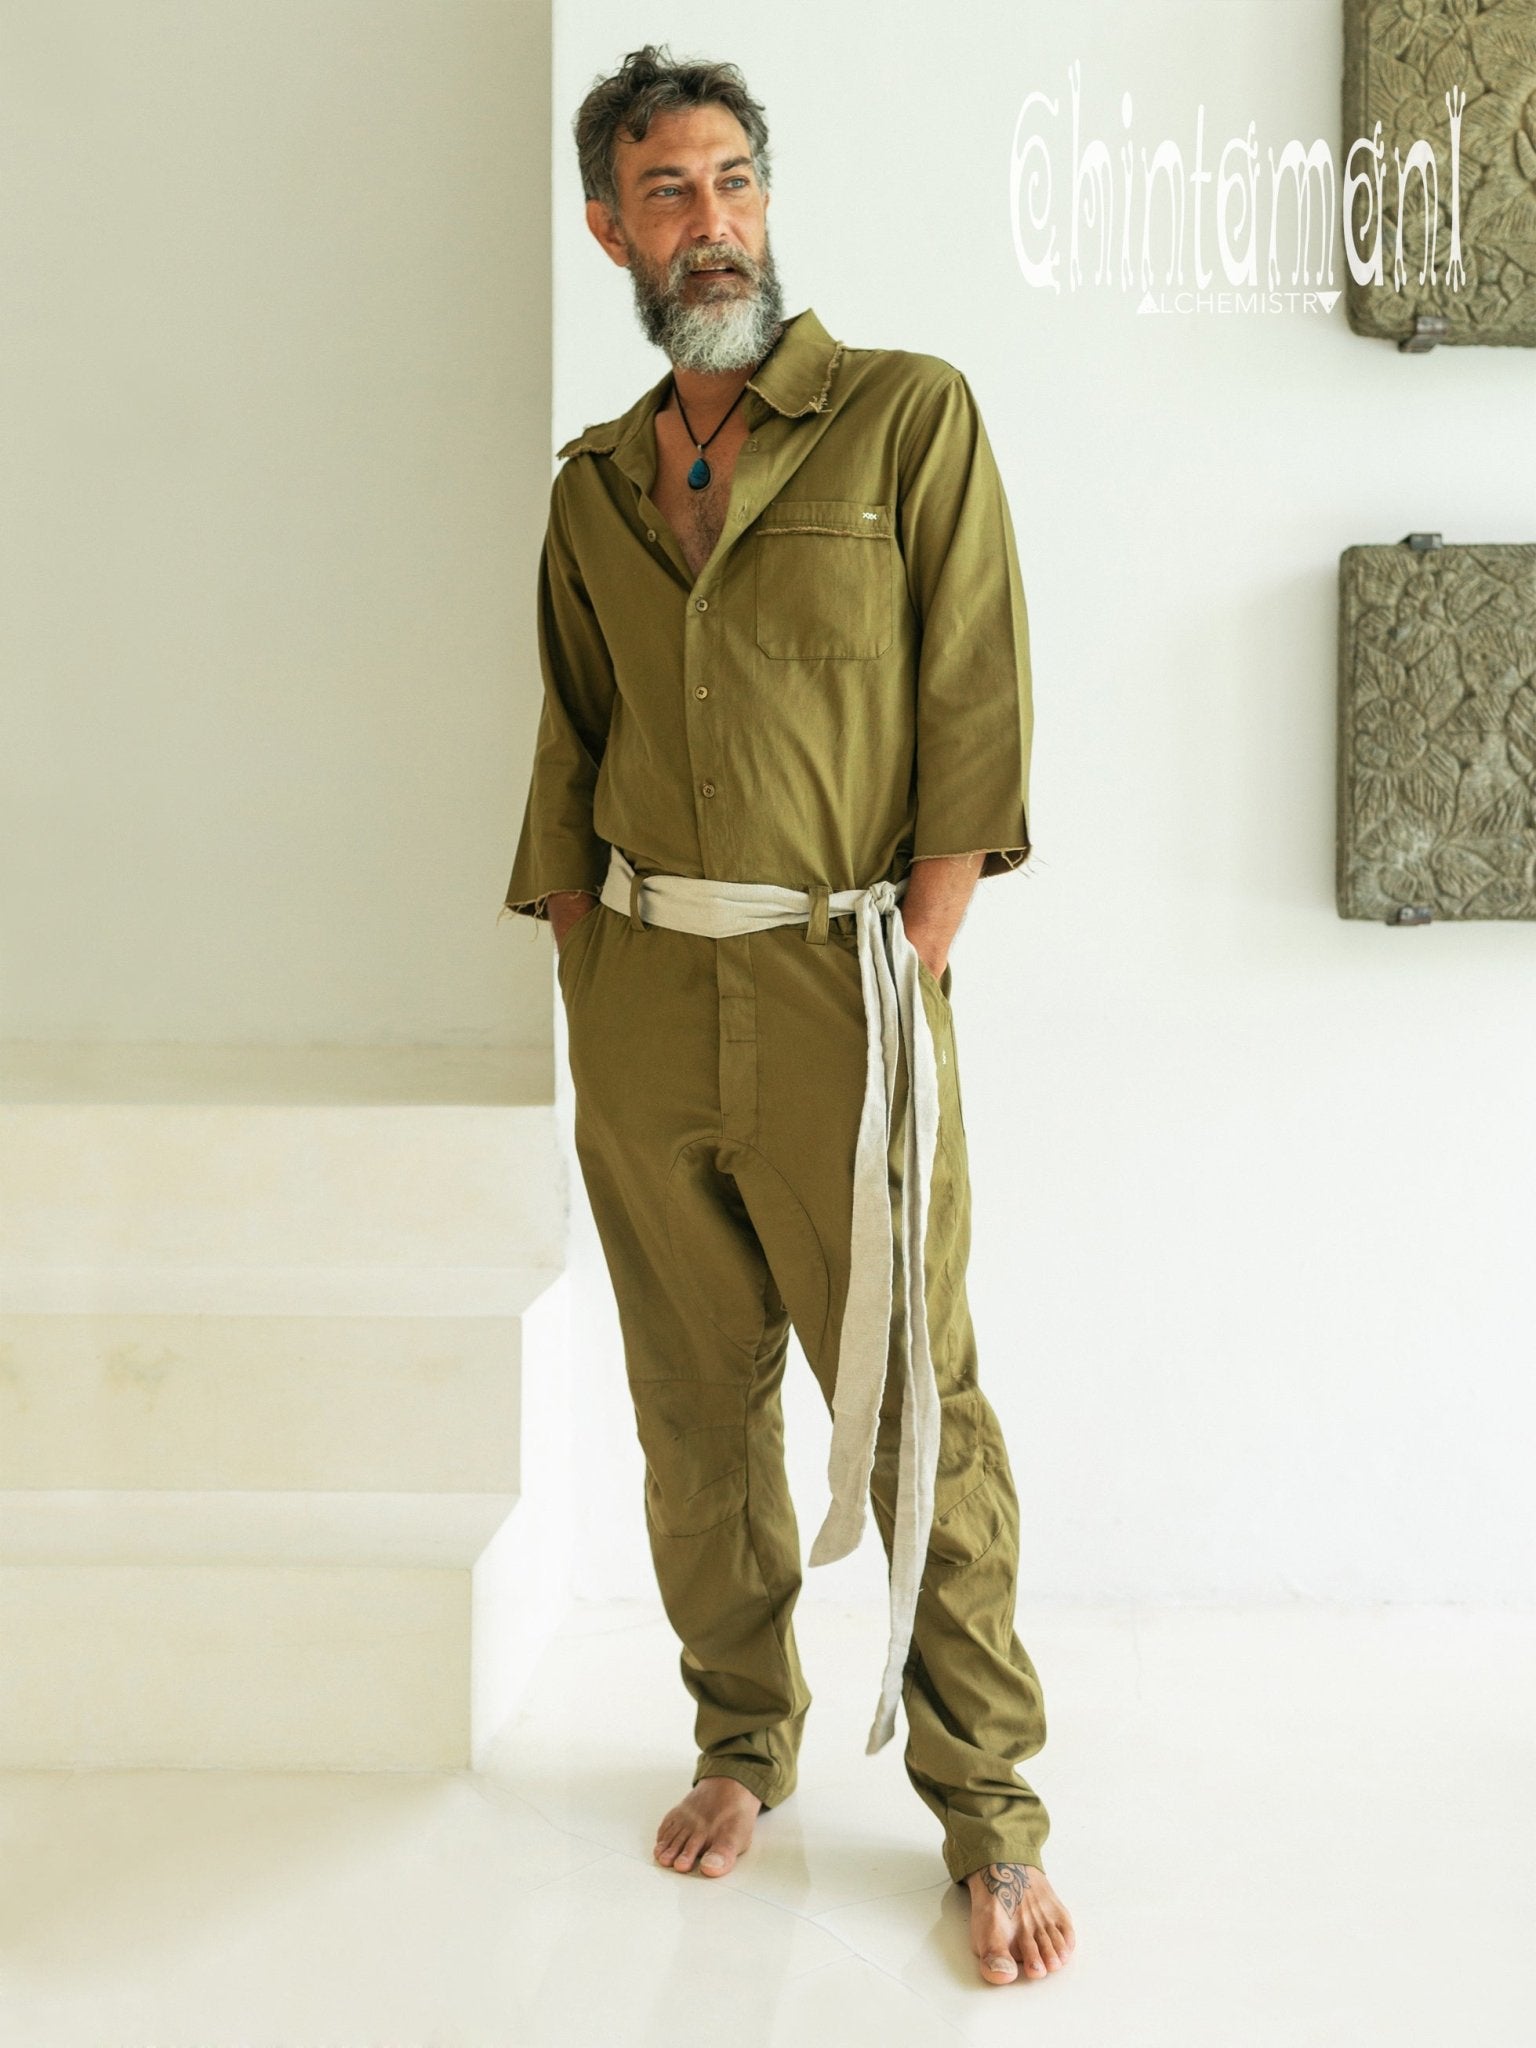 Long Overalls for Men / Coverall Jumpsuit with Belt / Dark Green